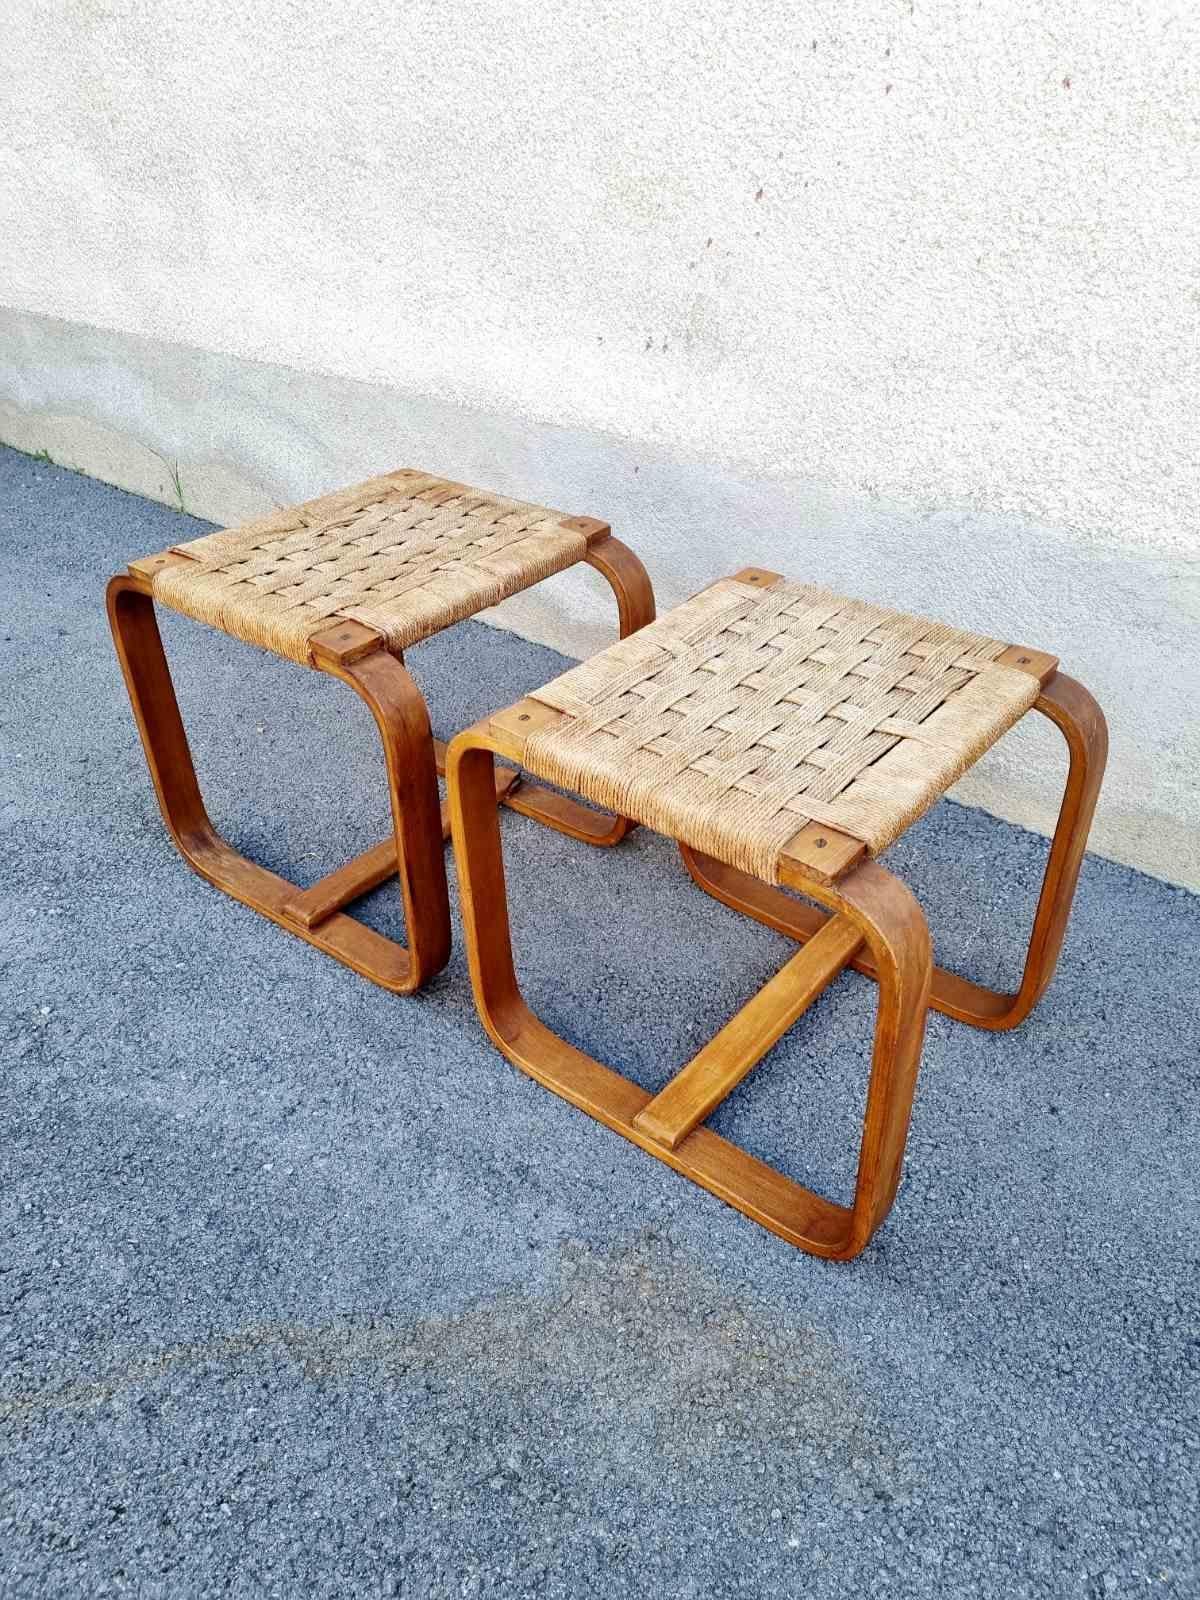 Mid-20th Century Rare Pair of Stools by Giuseppe Pagano Pogatschnig for Gino Maggioni, Italy 40s For Sale